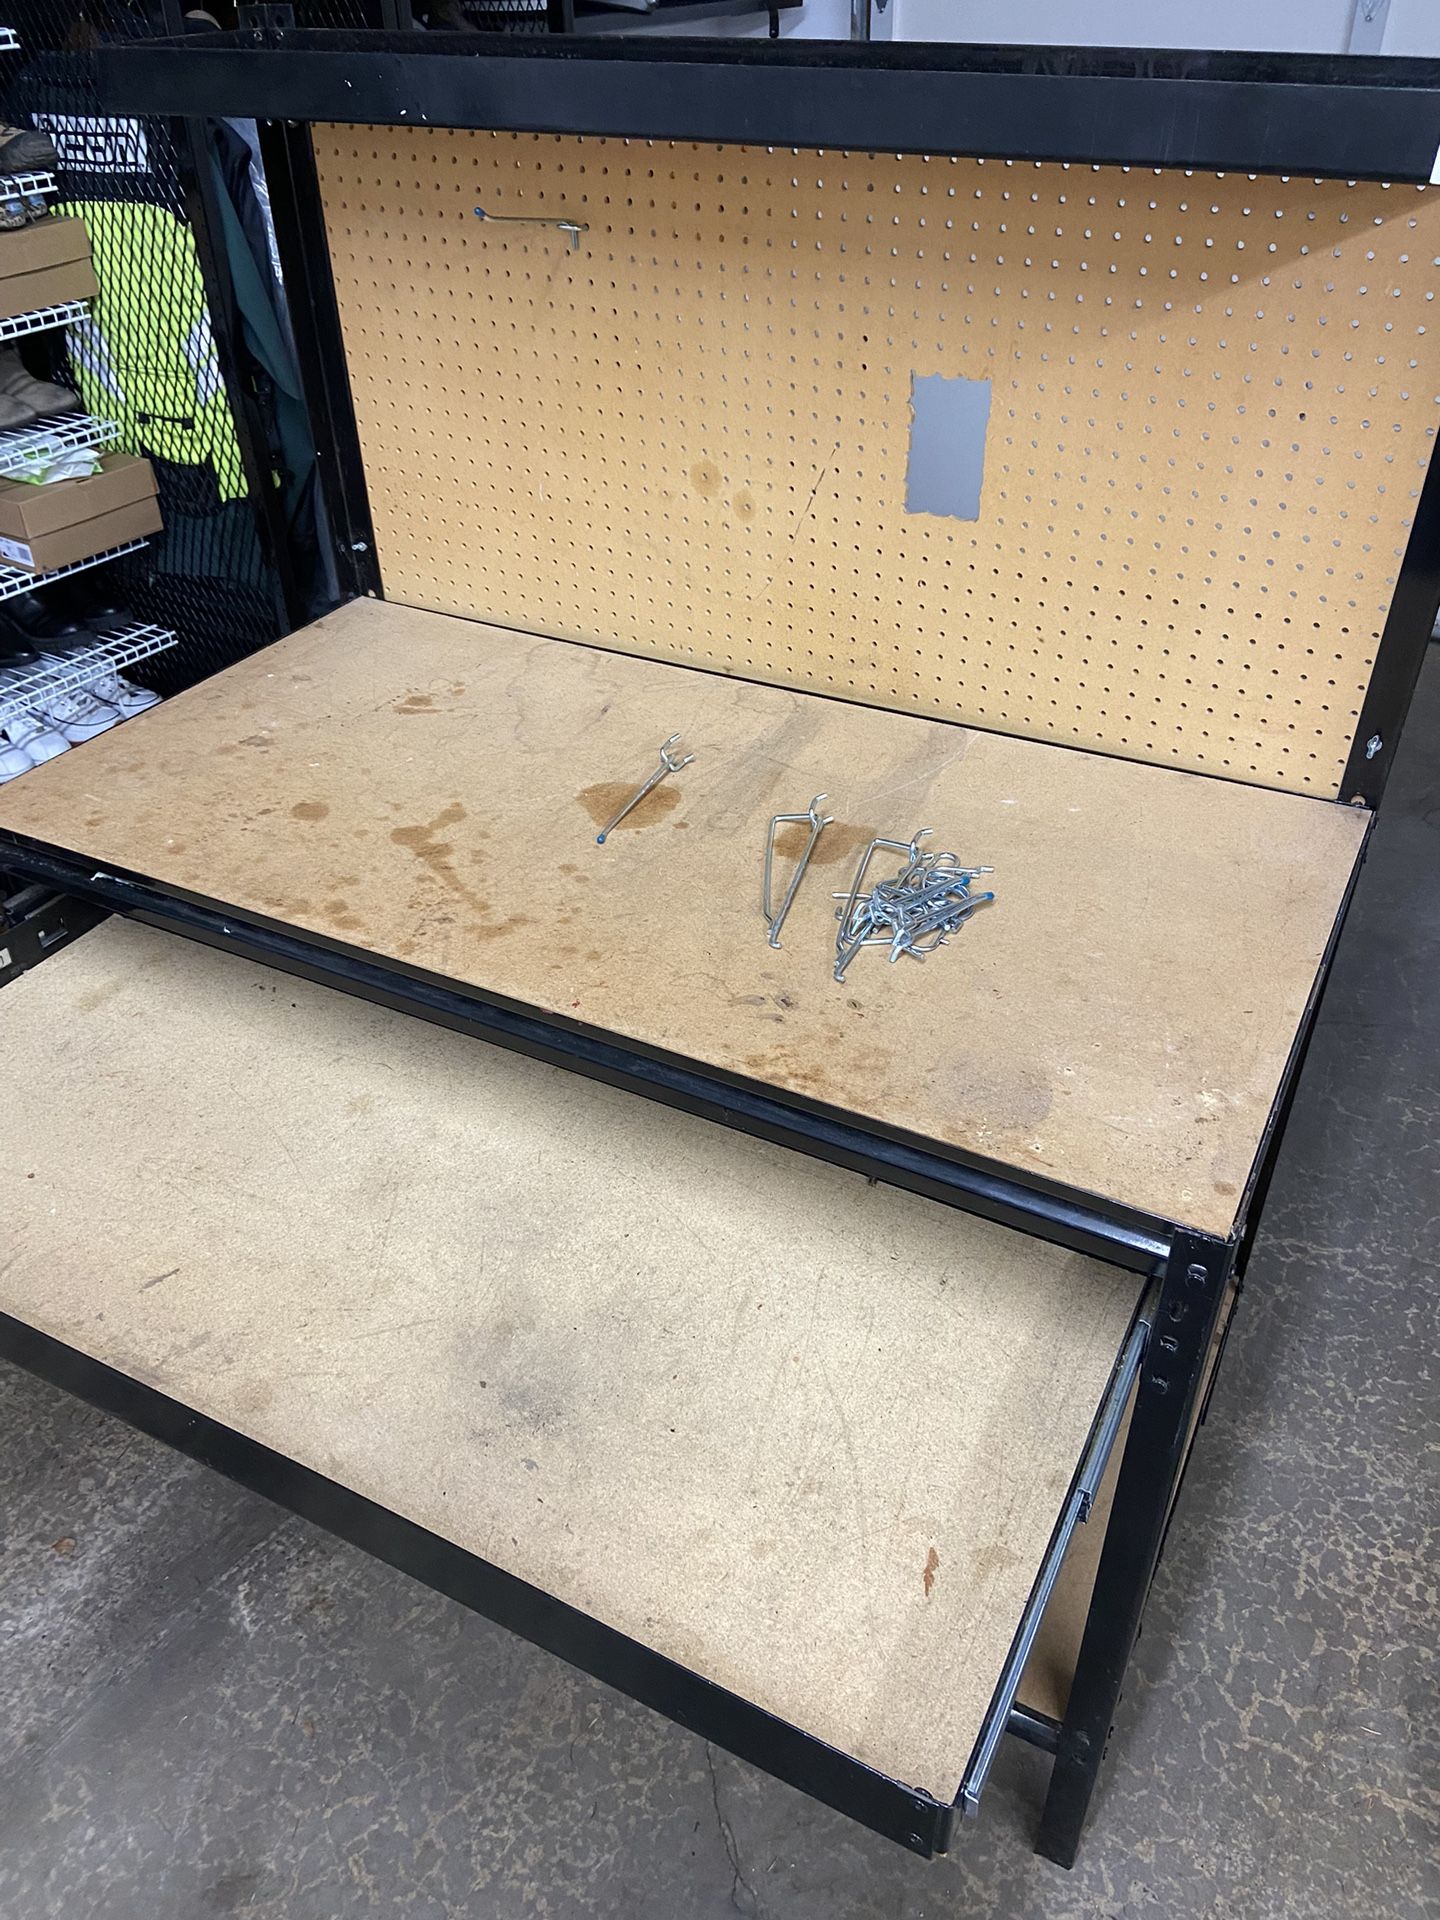 Gorilla Rack Work Bench W/ Drawer Tool Box for Sale in Eatonville, WA -  OfferUp